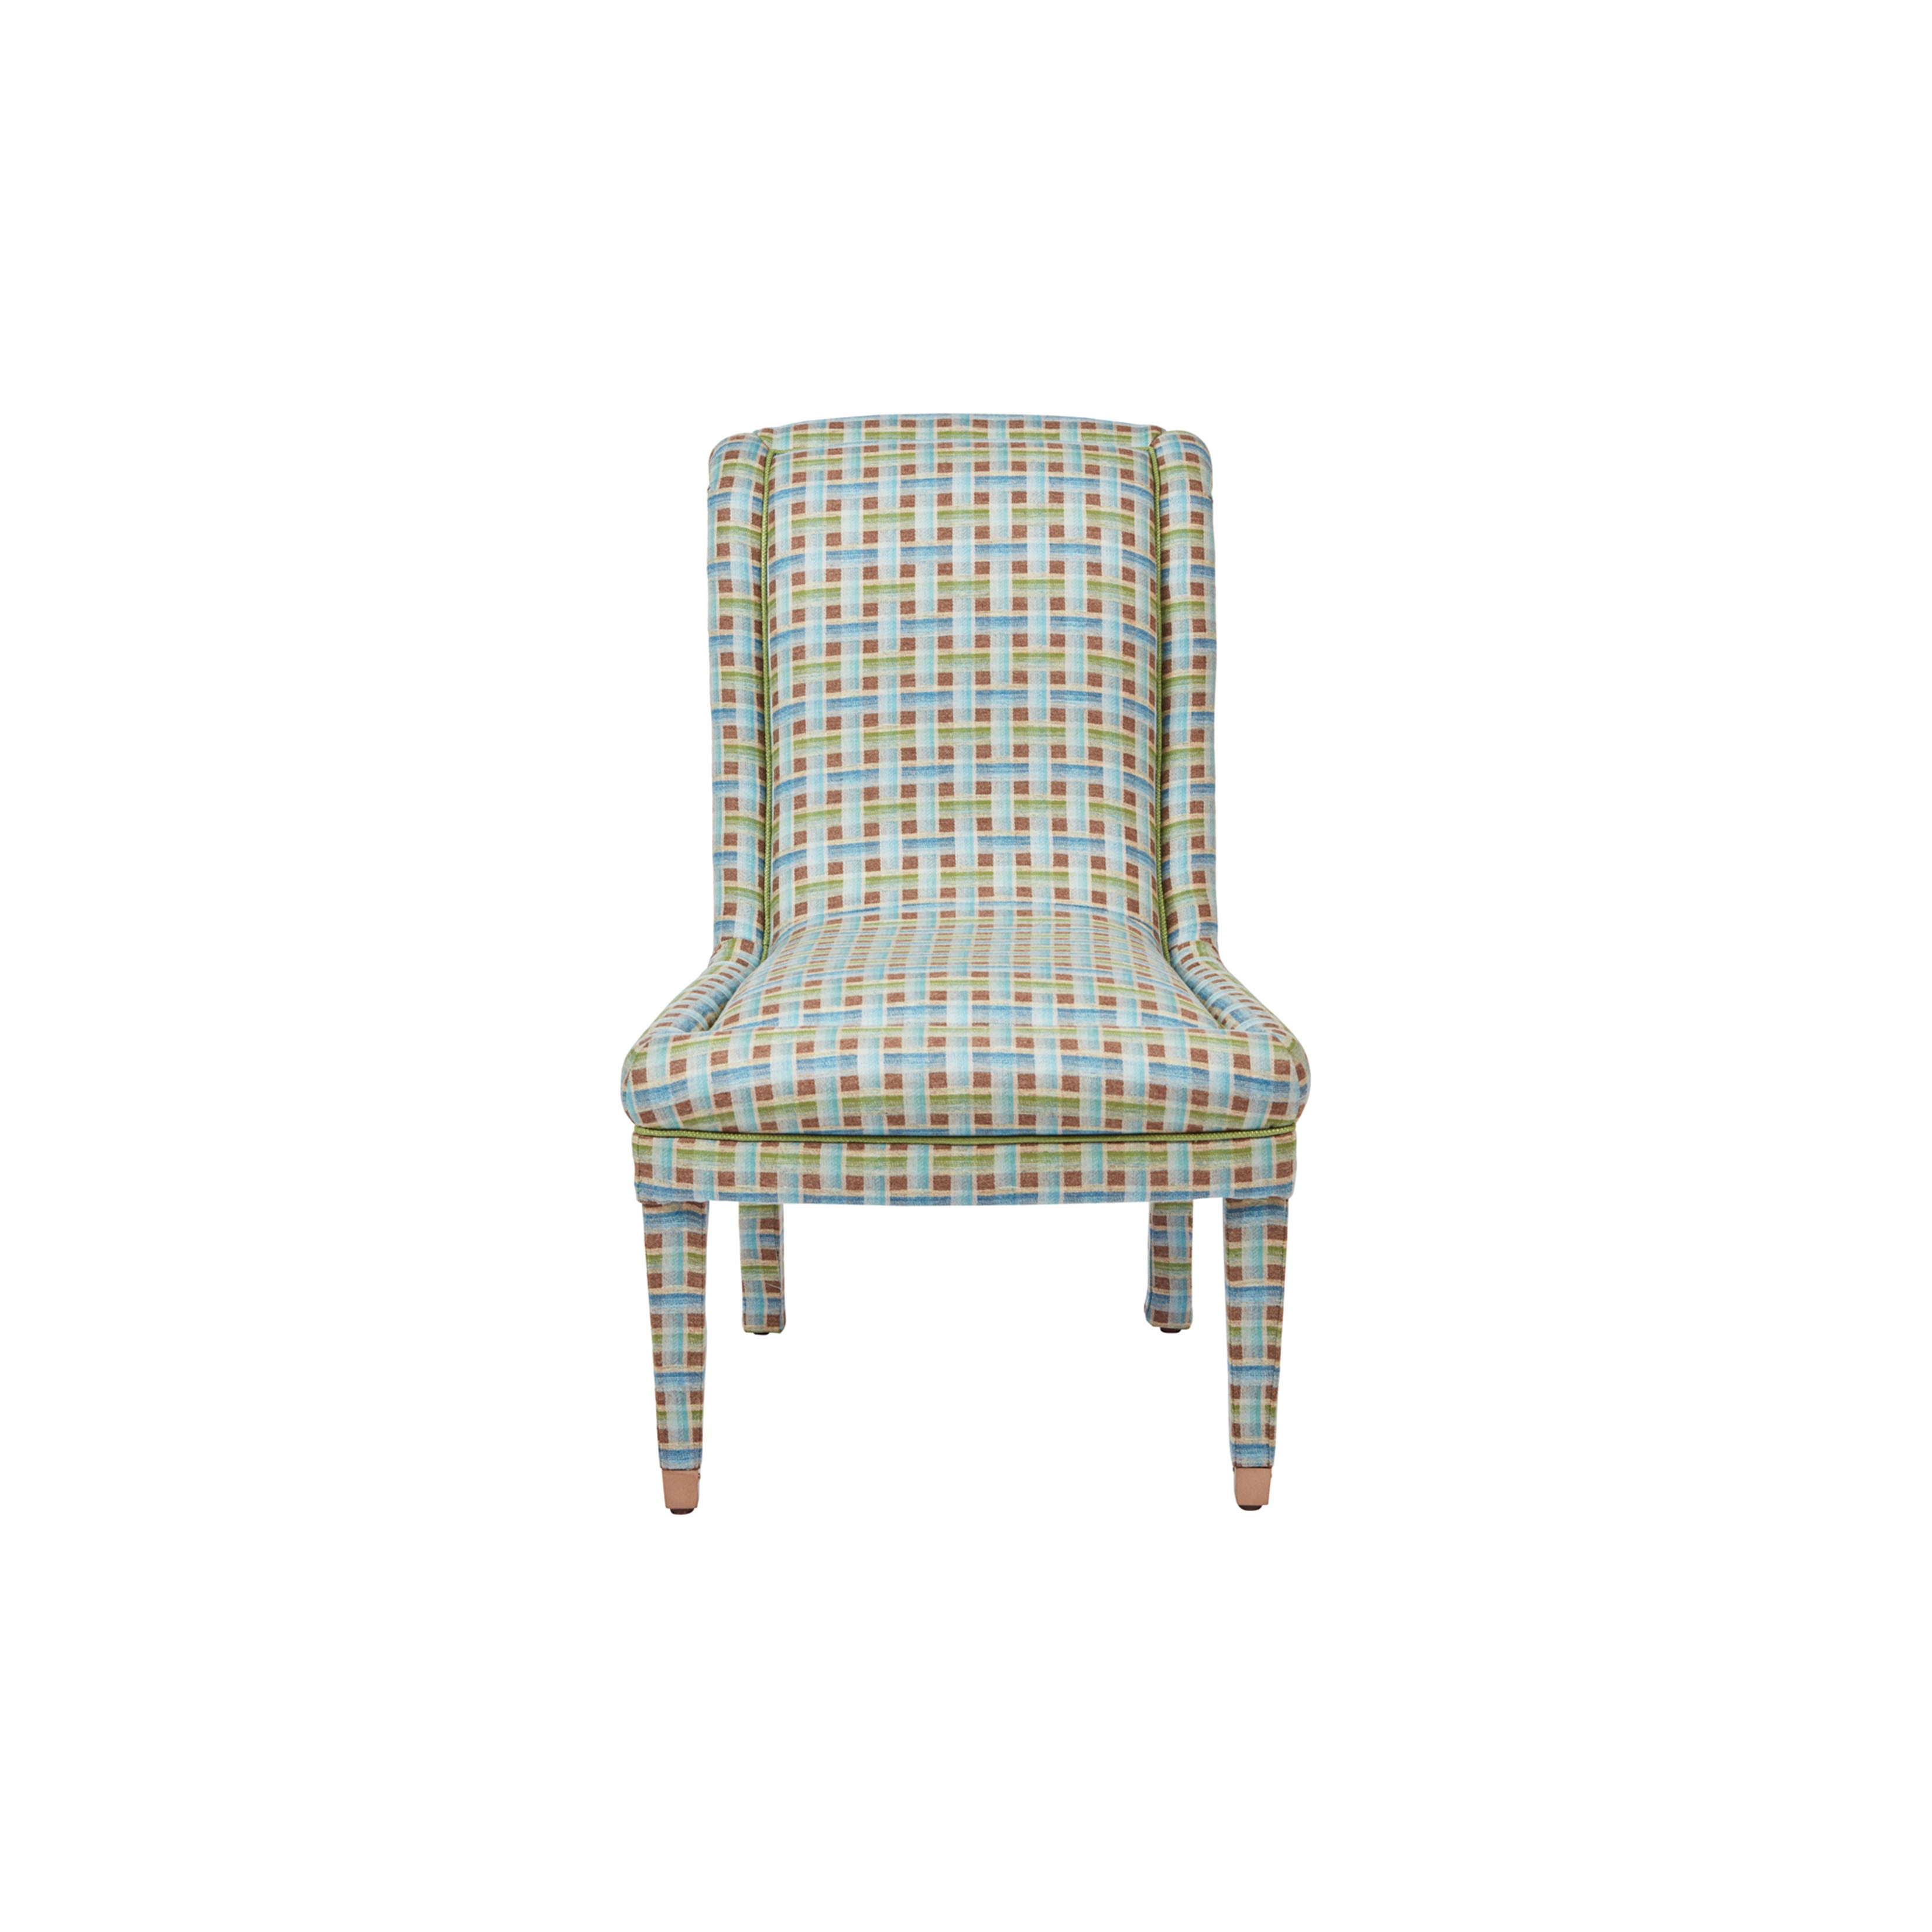 Nina Campbell Isabella Chair in Fontainebleau Blue/Green